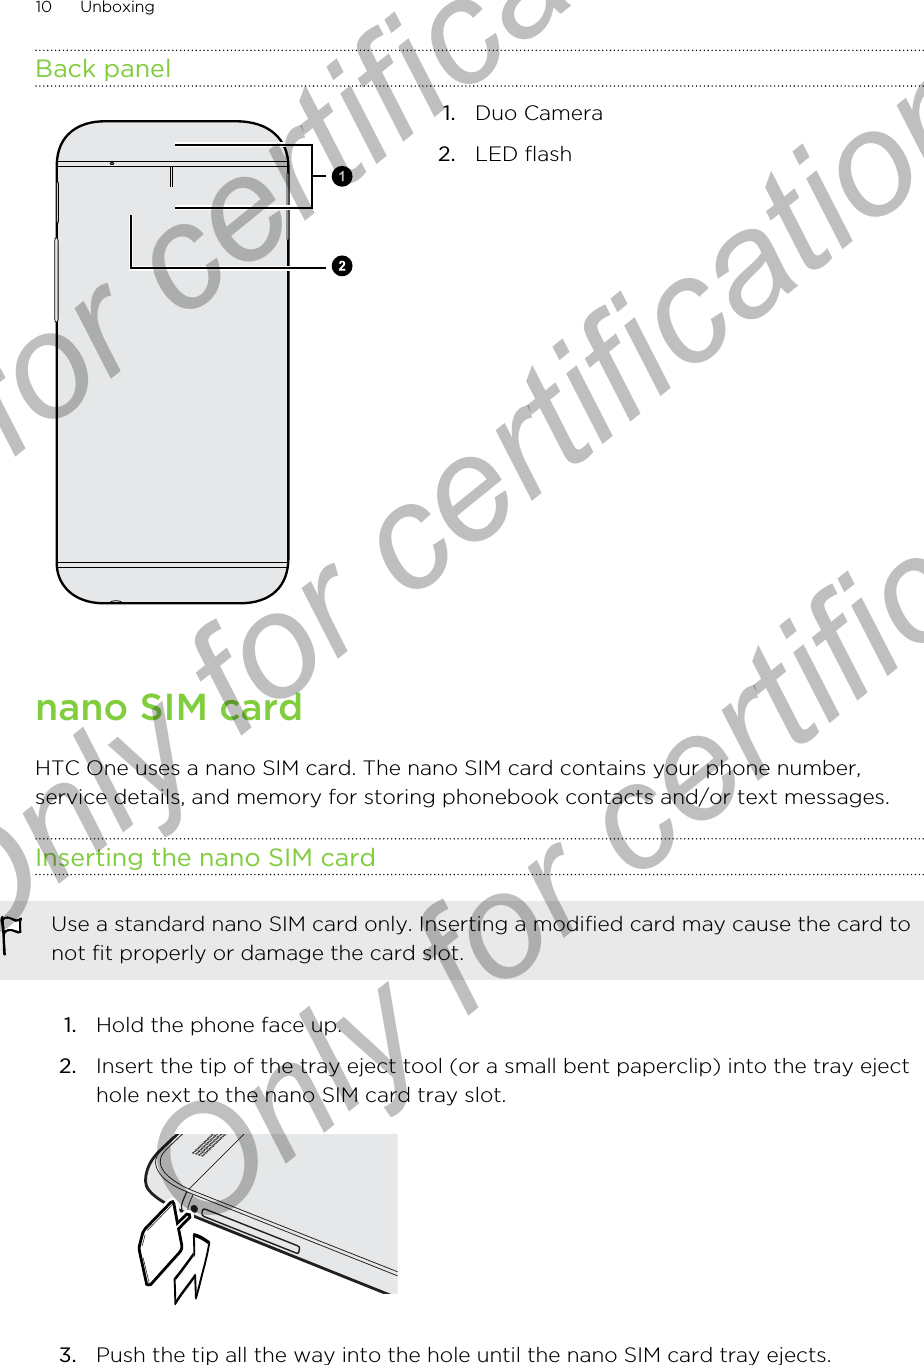 Back panel1. Duo Camera2. LED flashnano SIM cardHTC One uses a nano SIM card. The nano SIM card contains your phone number,service details, and memory for storing phonebook contacts and/or text messages.Inserting the nano SIM cardUse a standard nano SIM card only. Inserting a modified card may cause the card tonot fit properly or damage the card slot.1. Hold the phone face up.2. Insert the tip of the tray eject tool (or a small bent paperclip) into the tray ejecthole next to the nano SIM card tray slot. 3. Push the tip all the way into the hole until the nano SIM card tray ejects.10 UnboxingOnly for certification  Only for certification  Only for certification